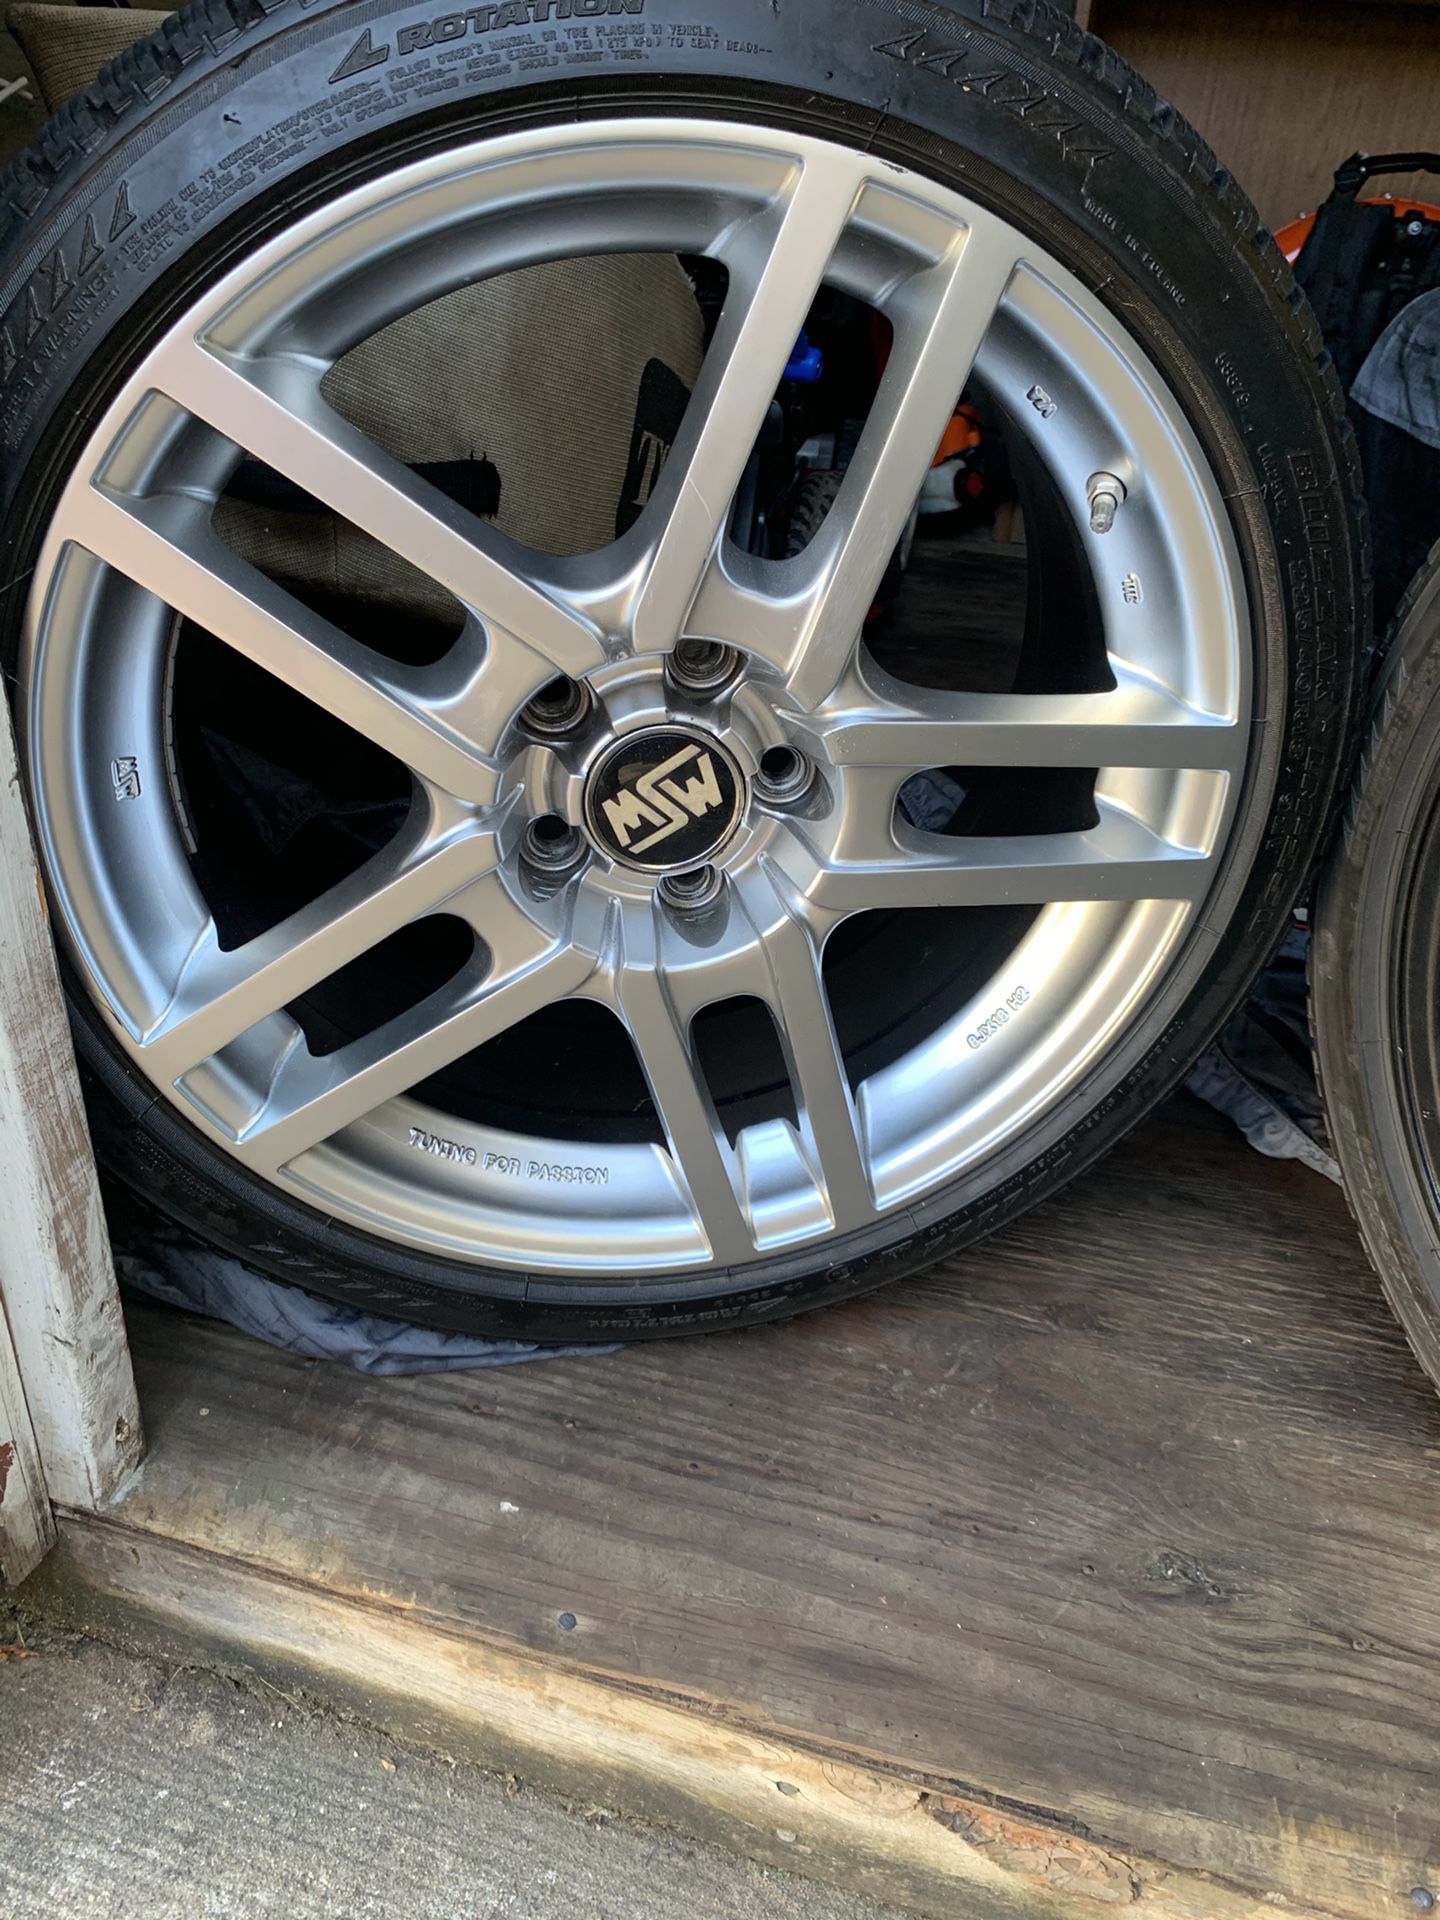 Msw 18 inch rims 5 lots like new tires and rims or trade for a black ones